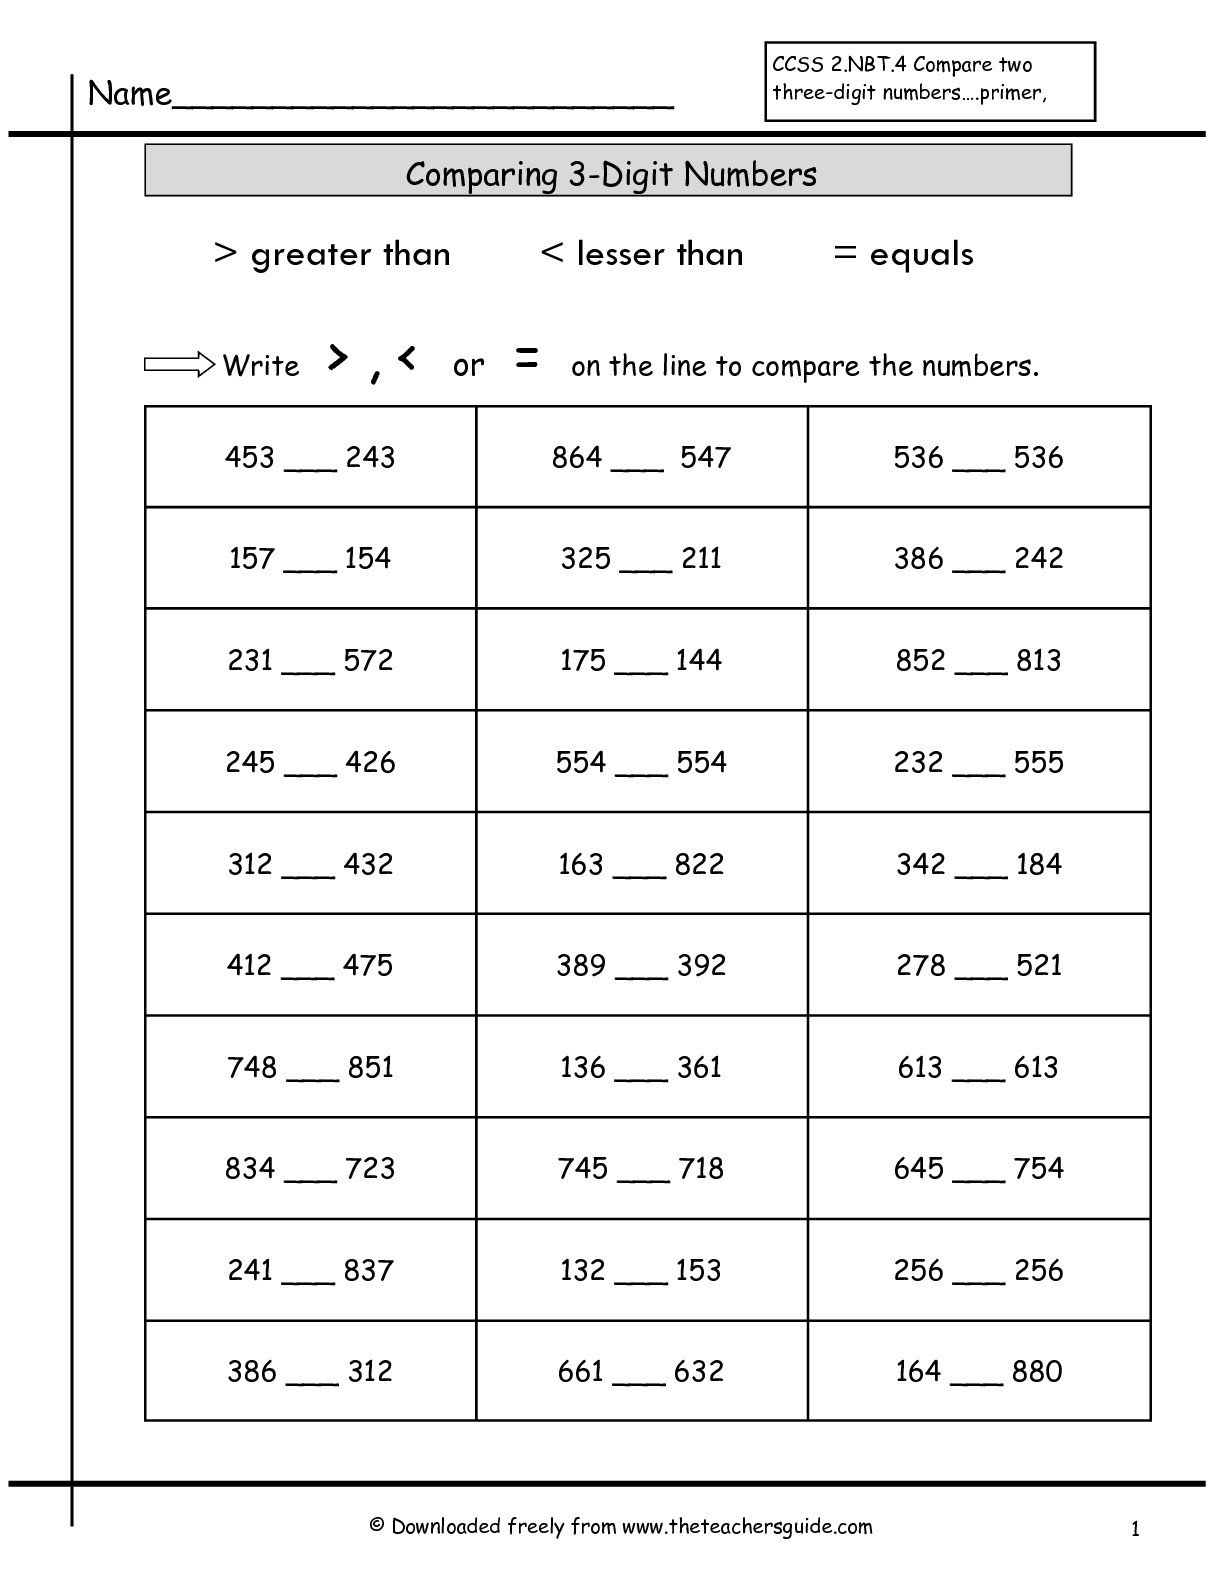 place-value-comparing-numbers-worksheet-free-download-gmbar-co